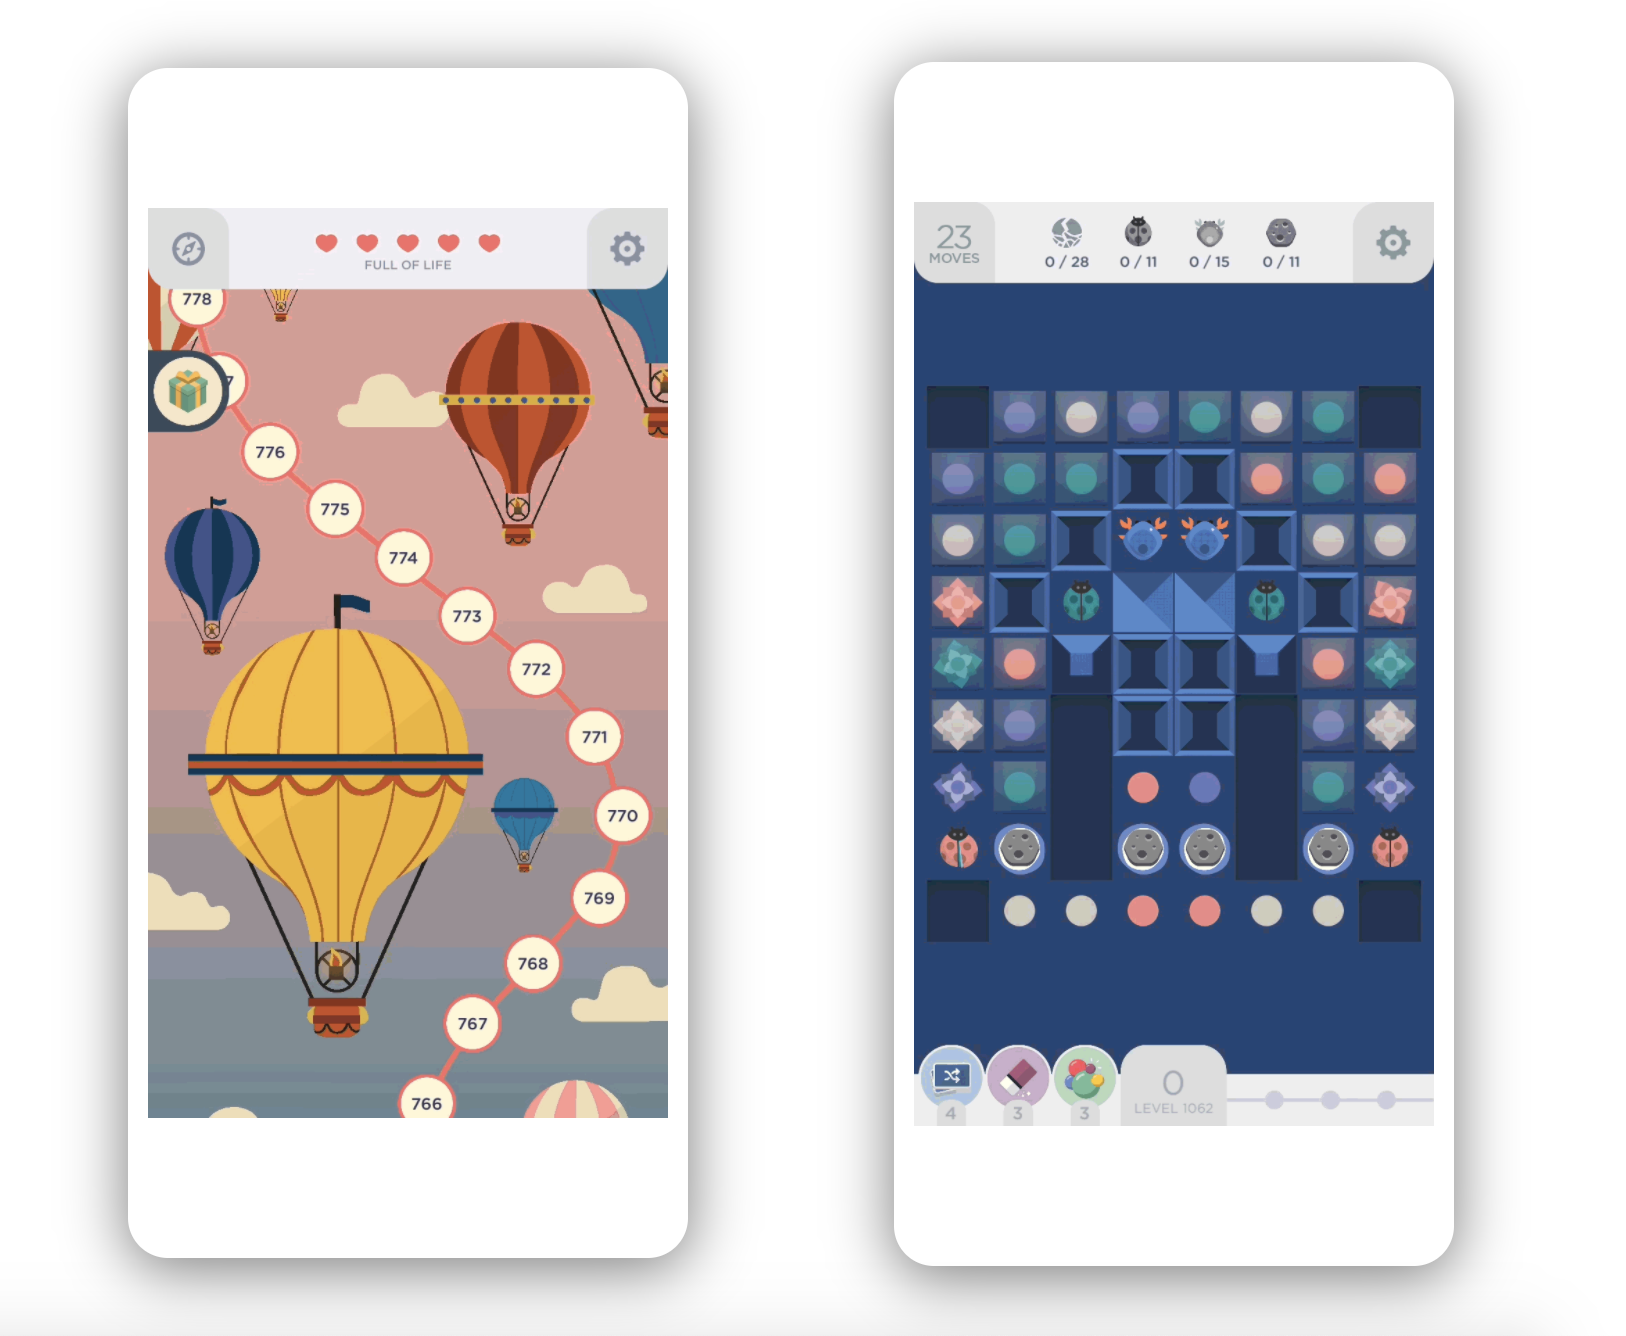 Two screenshots of the game: one of the path of levels with hot air balloon animation, theo ther showing a level with ladybug dots, crabs, and colorful dots